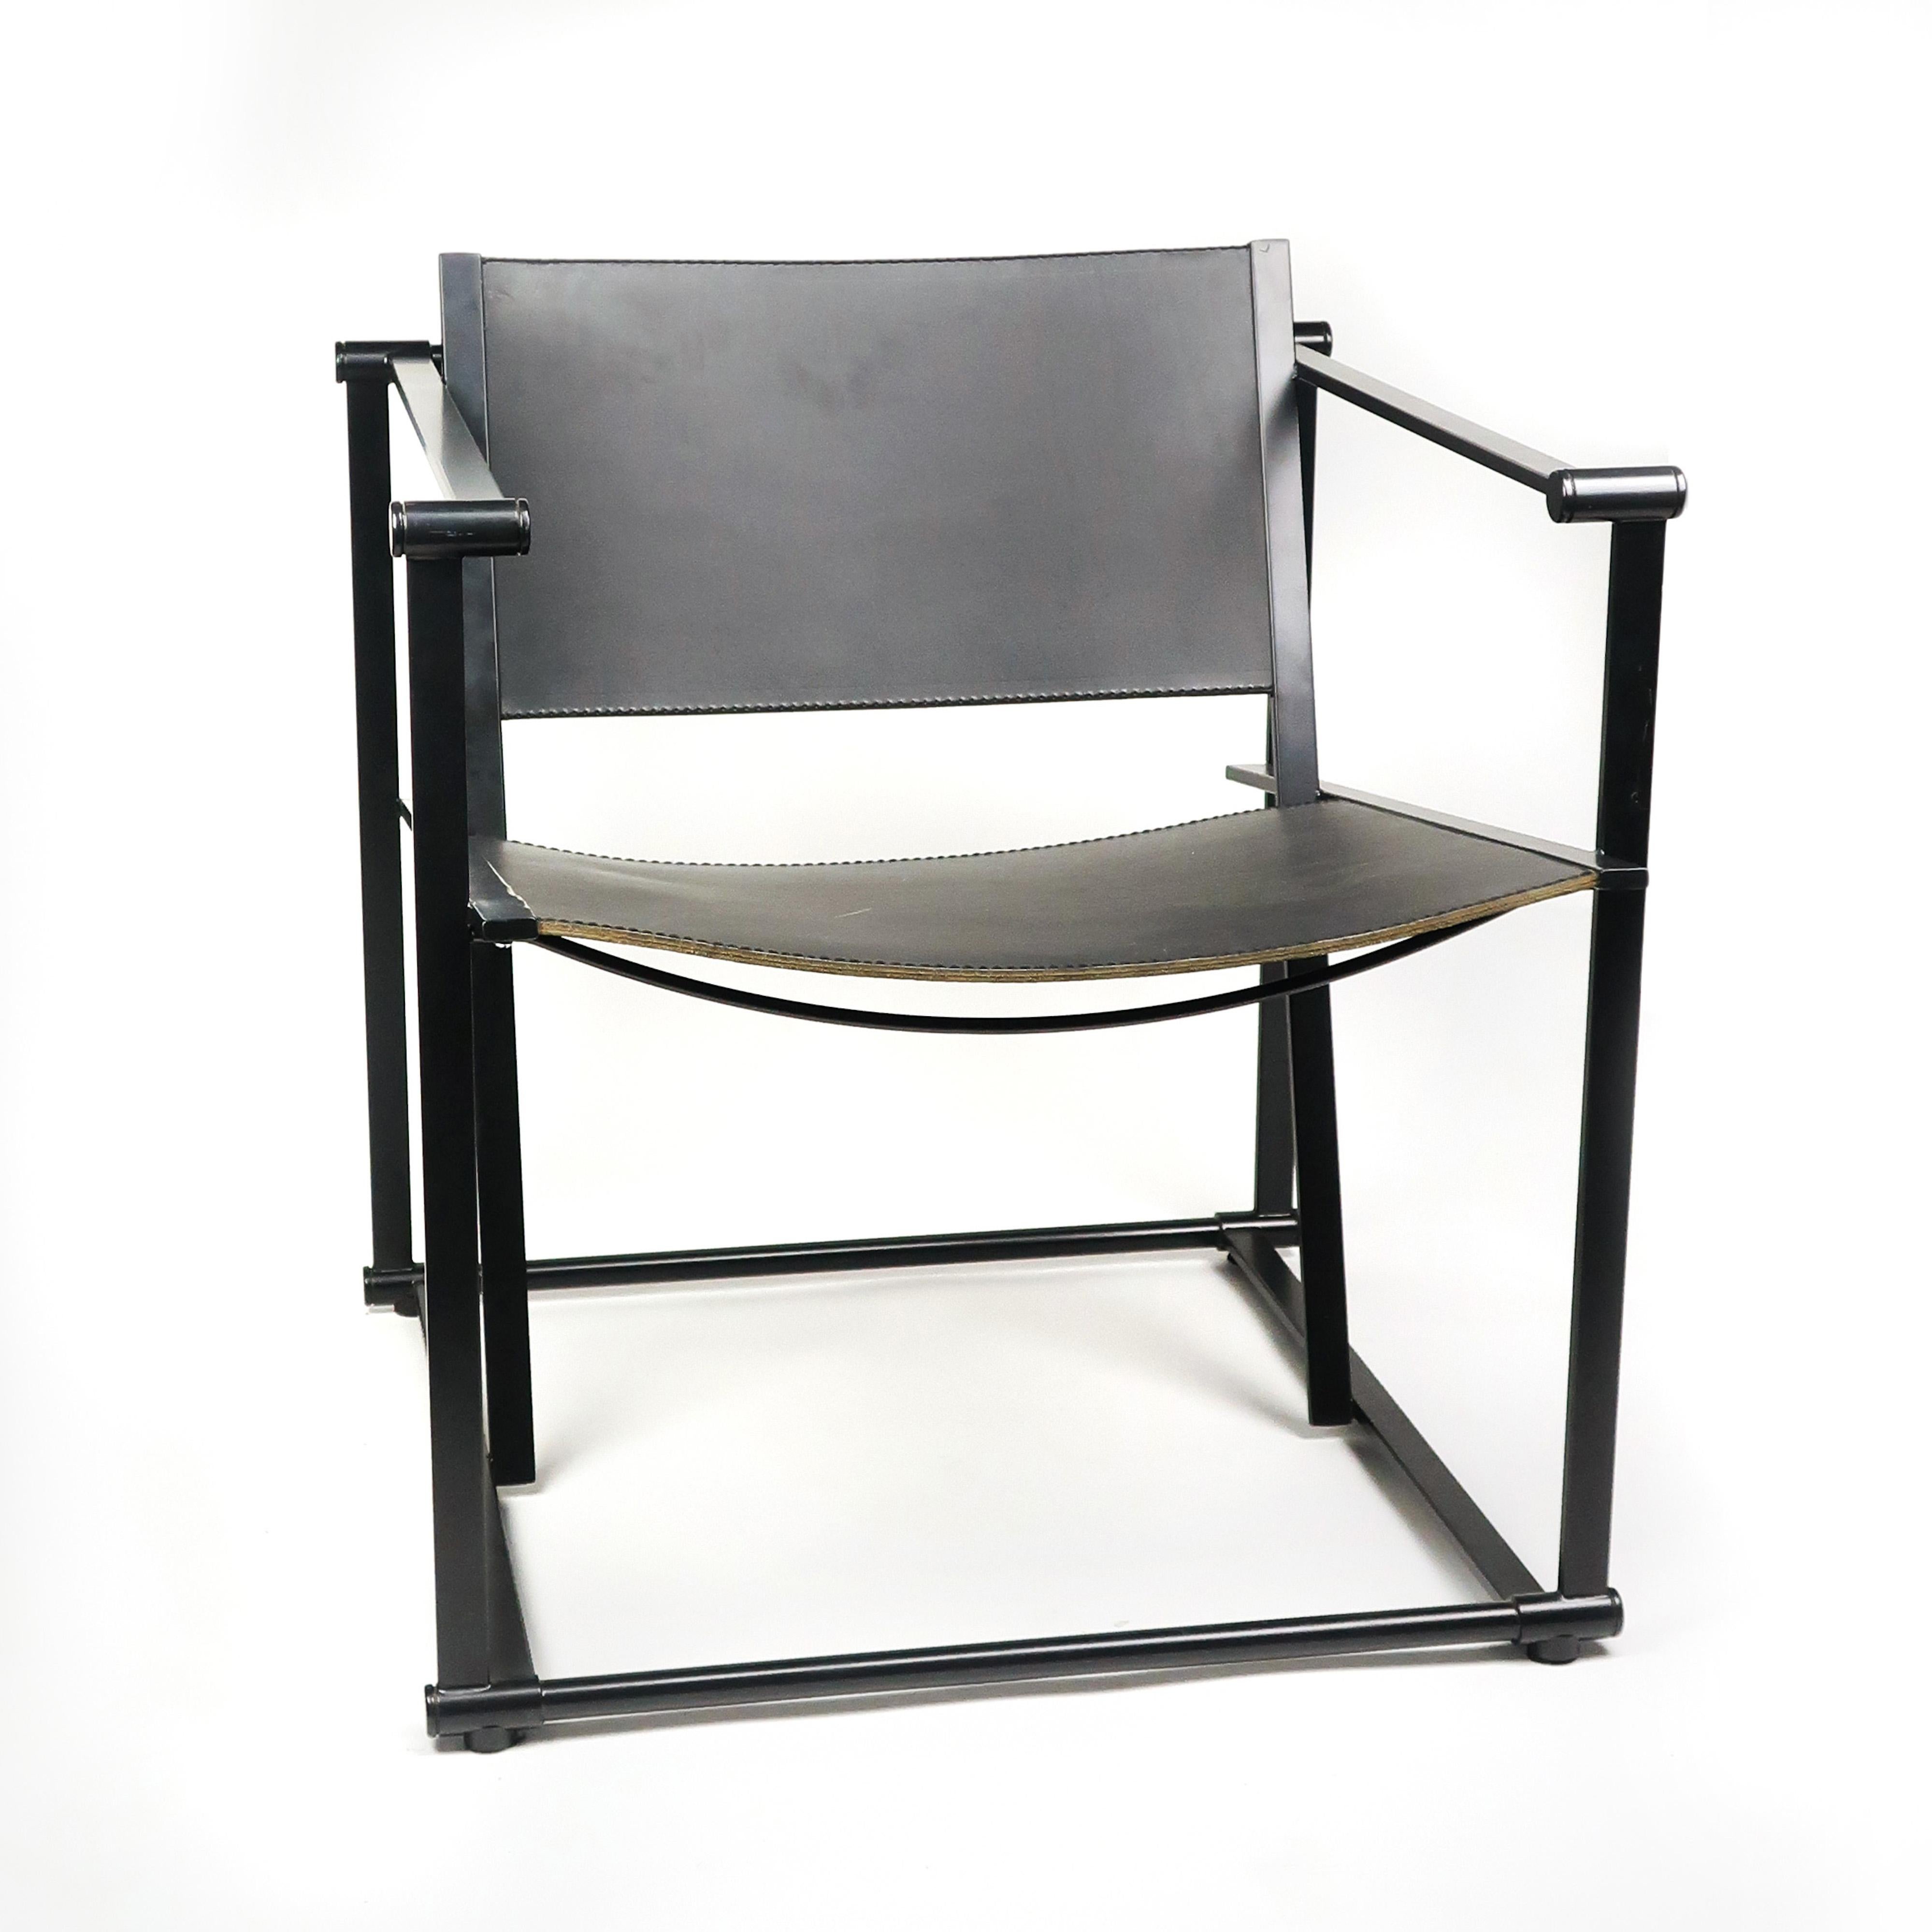 A vintage FM62 cube chair by Radboud Van Beekum for Pastoe with a black enameled frame and black saddle leather seat and back. Originally introduced in 1980 during the Triennale in Poznan, Poland. Radboud Van Beekum graduated from the Gerrit